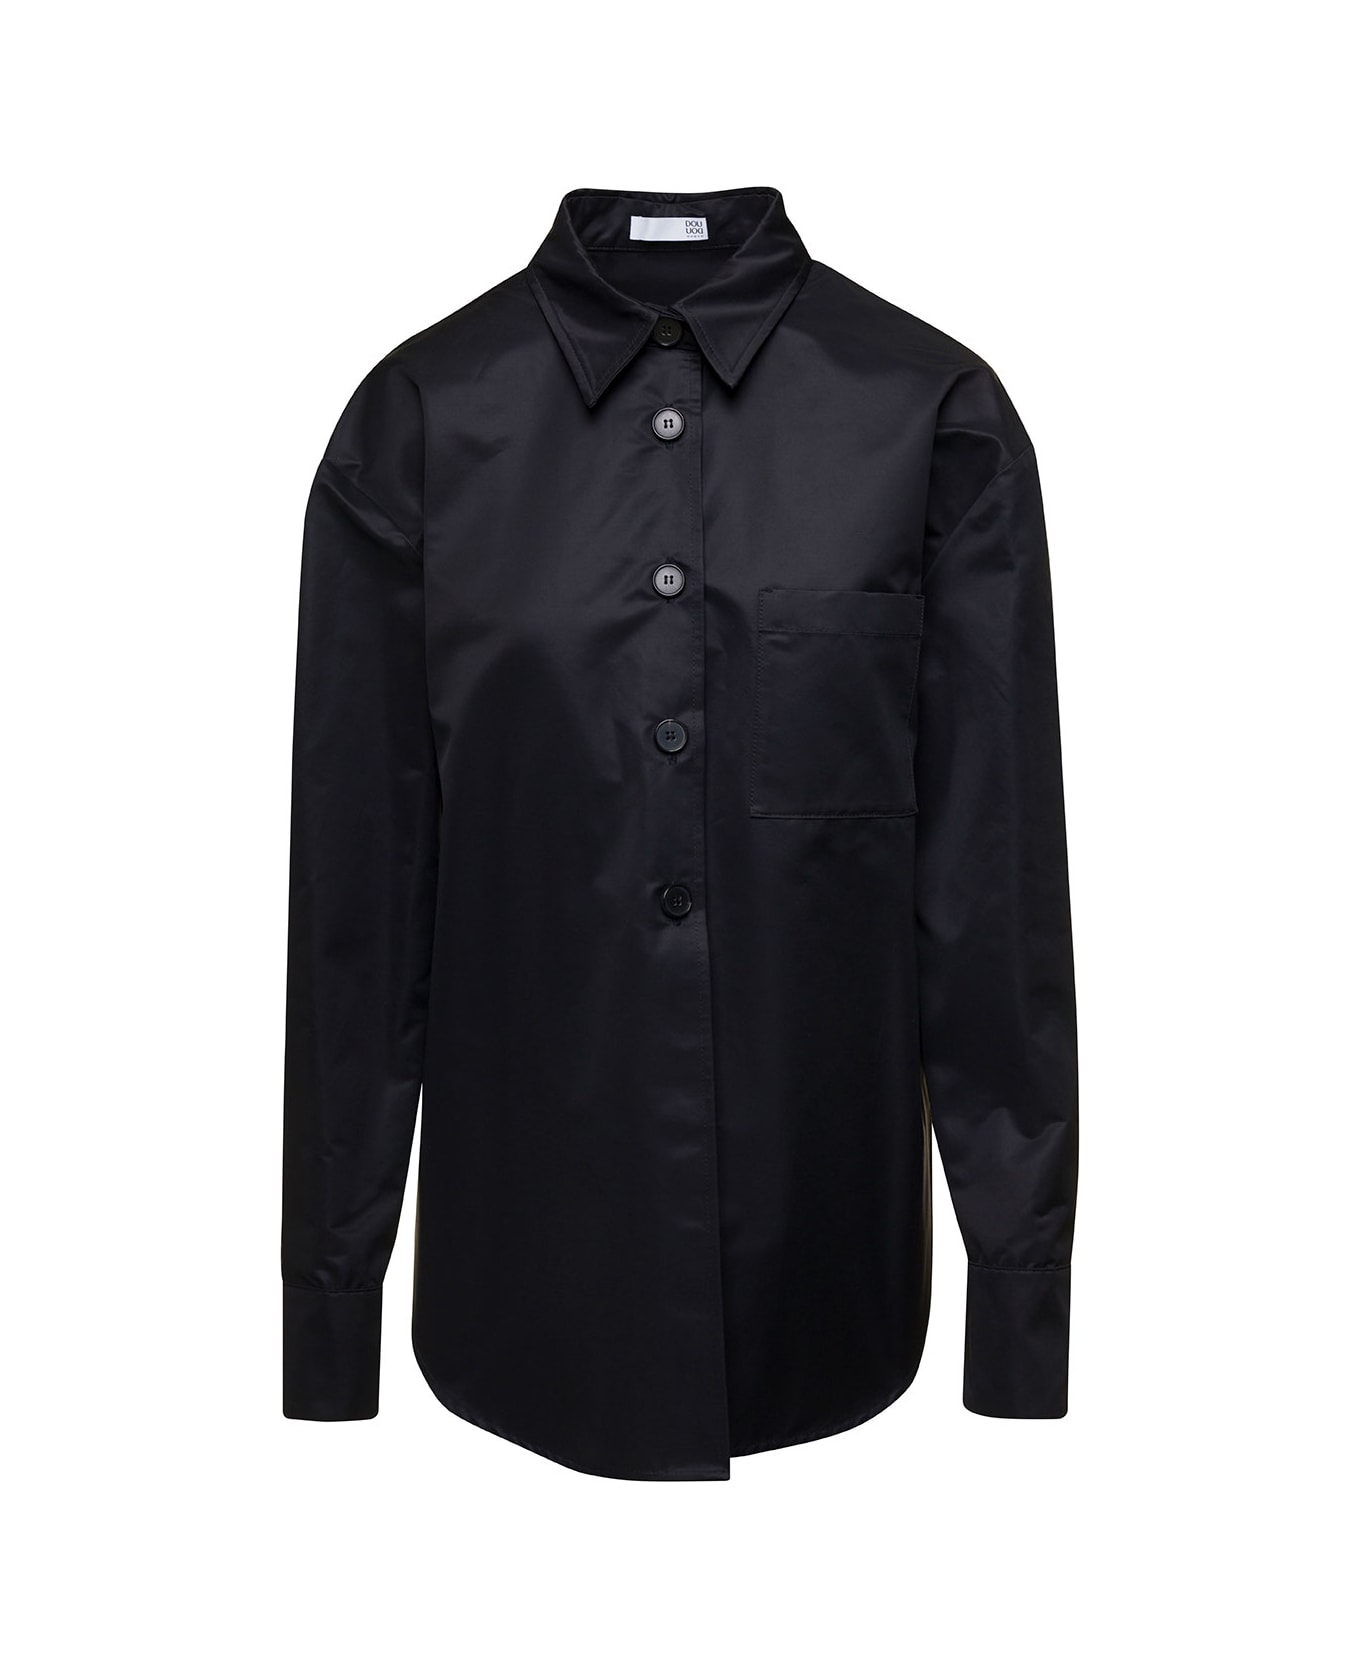 Douuod Black Long-sleeve Shirt With Tonal Buttons In Cotton Blend Woman - Black シャツ